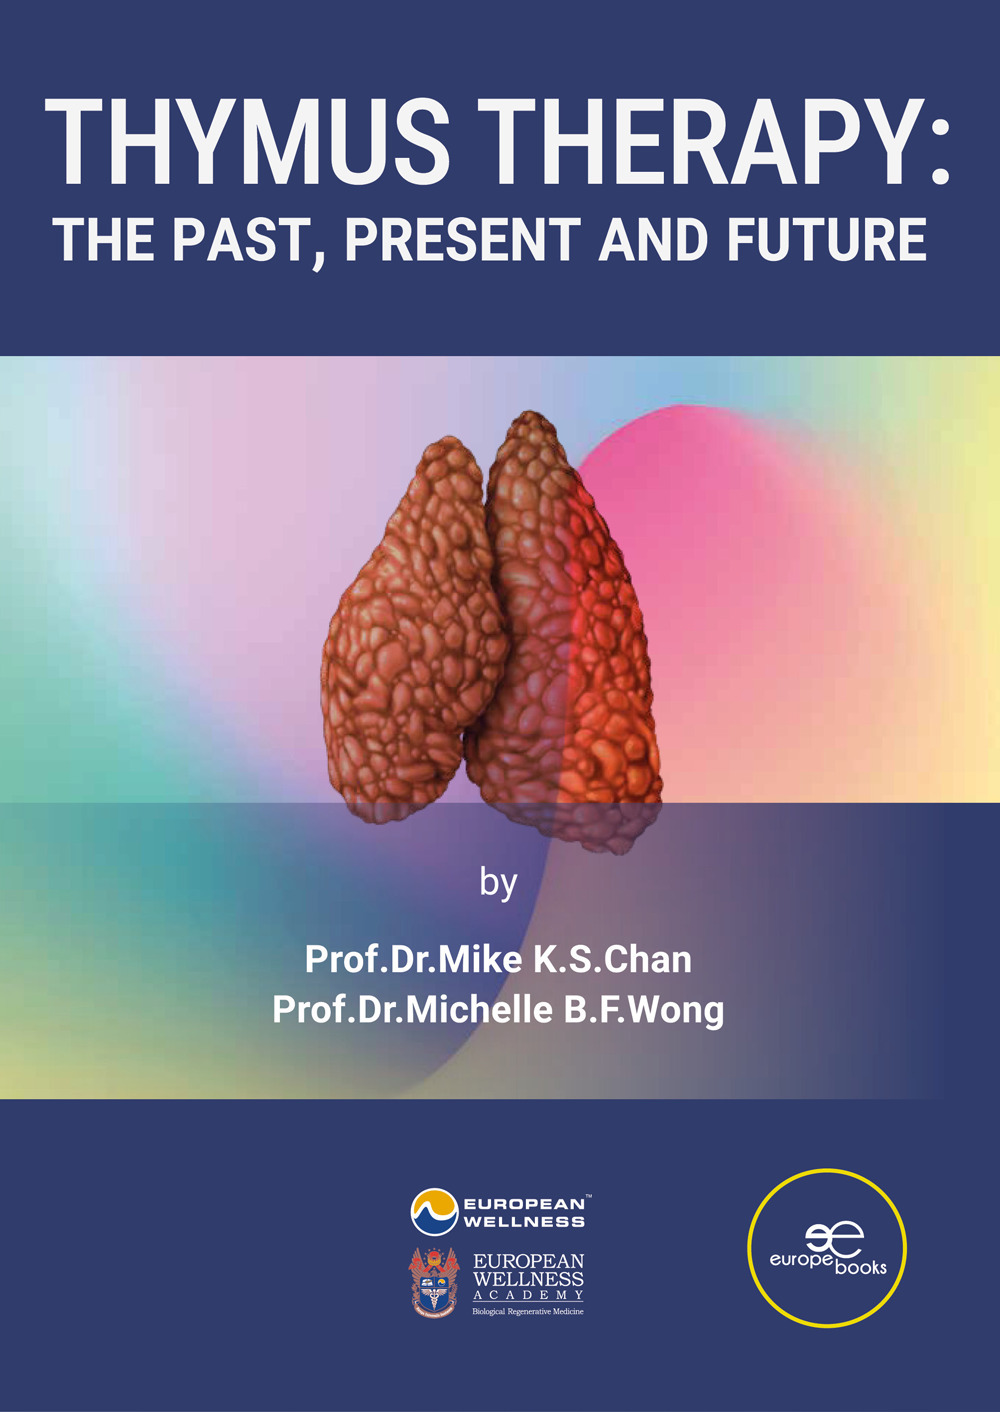 Thymus therapy. The past, present and future